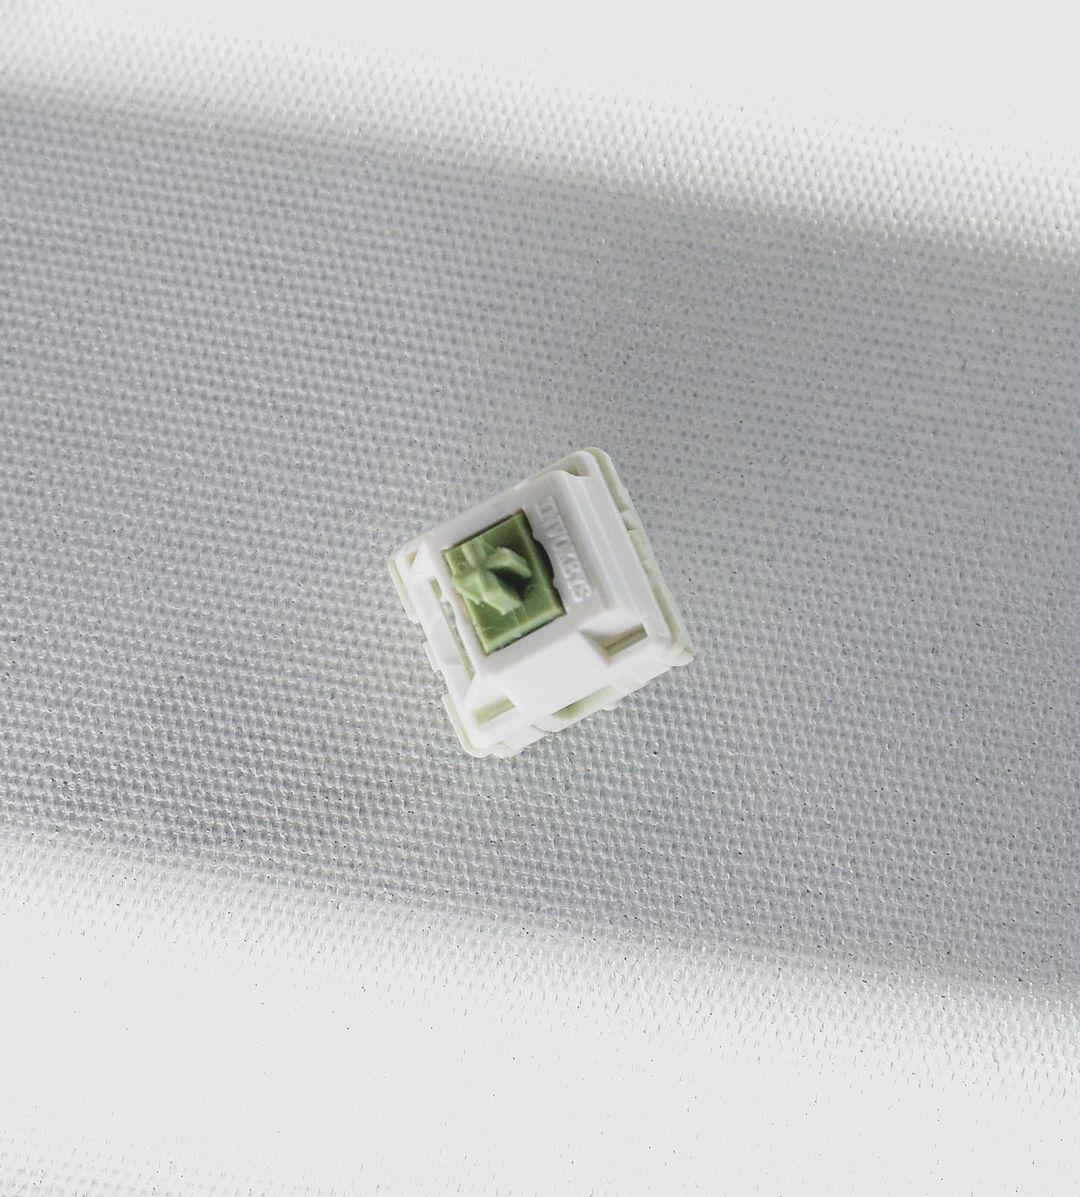 Invokeys Matcha Latte V2 Linear Switches (Hand Lubed) - Keebz N CablesKeyboard Switches